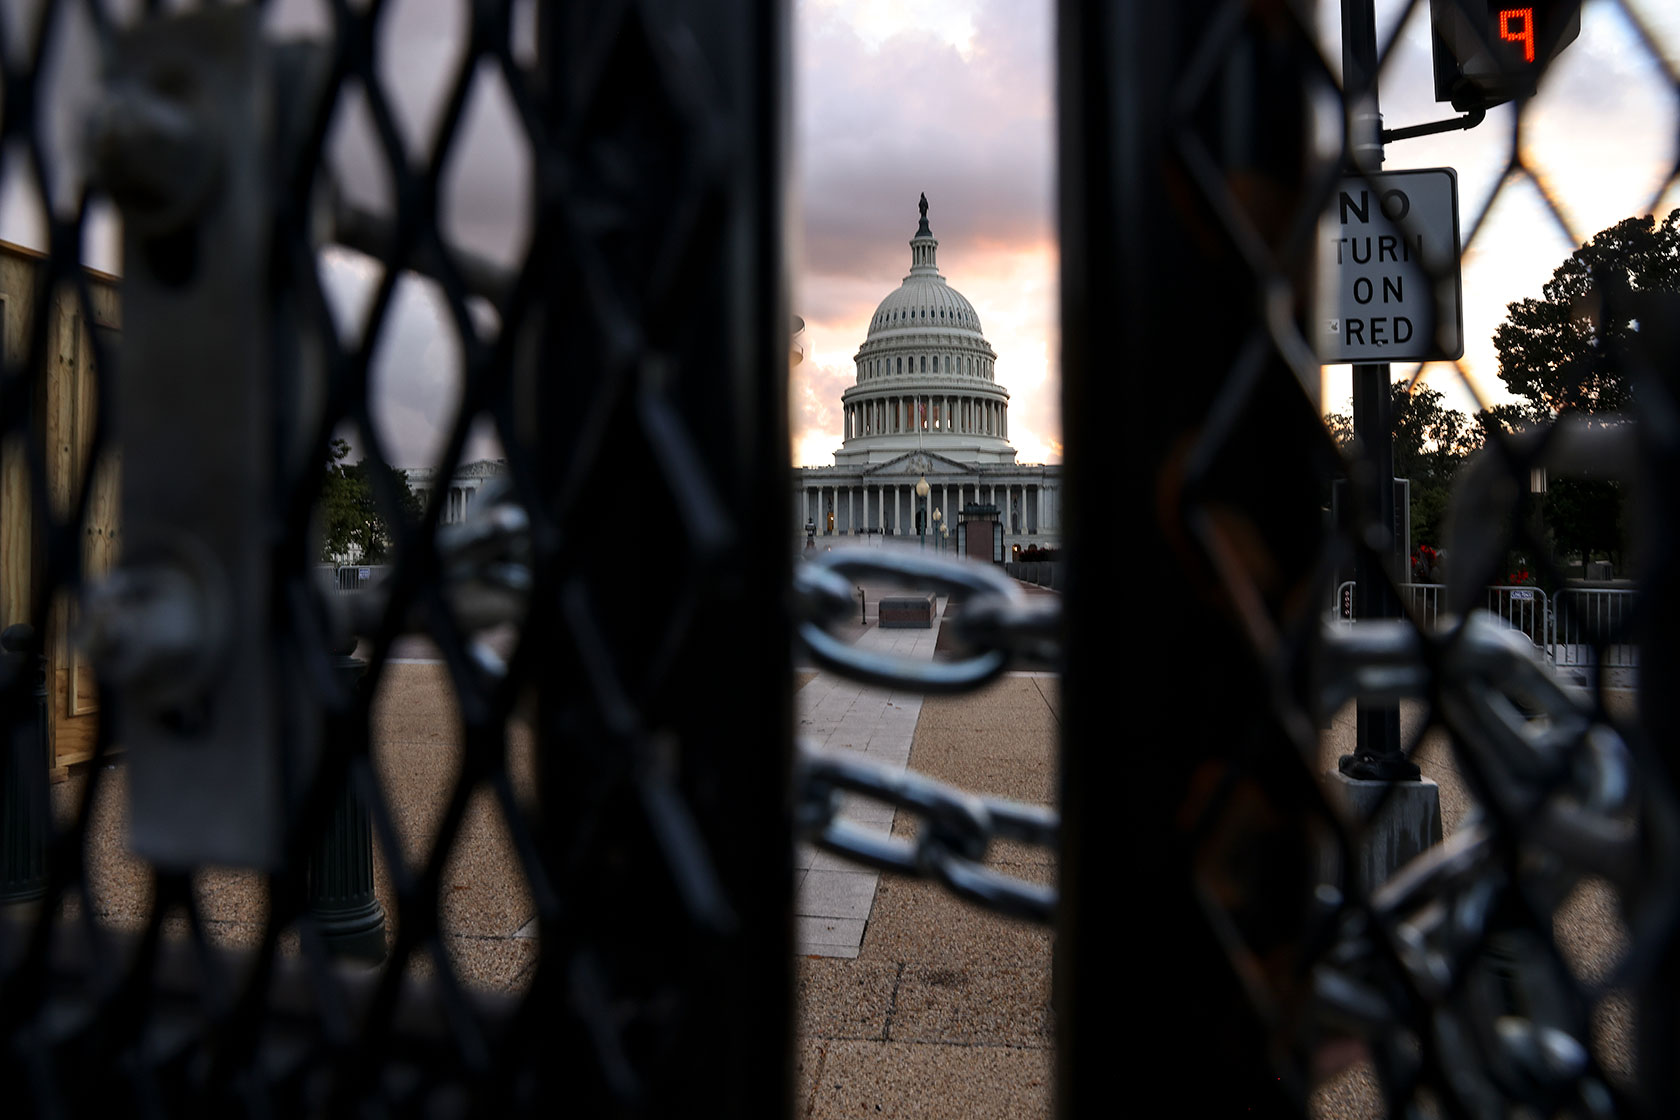 The U.S. Capitol is seen behind security fencing.